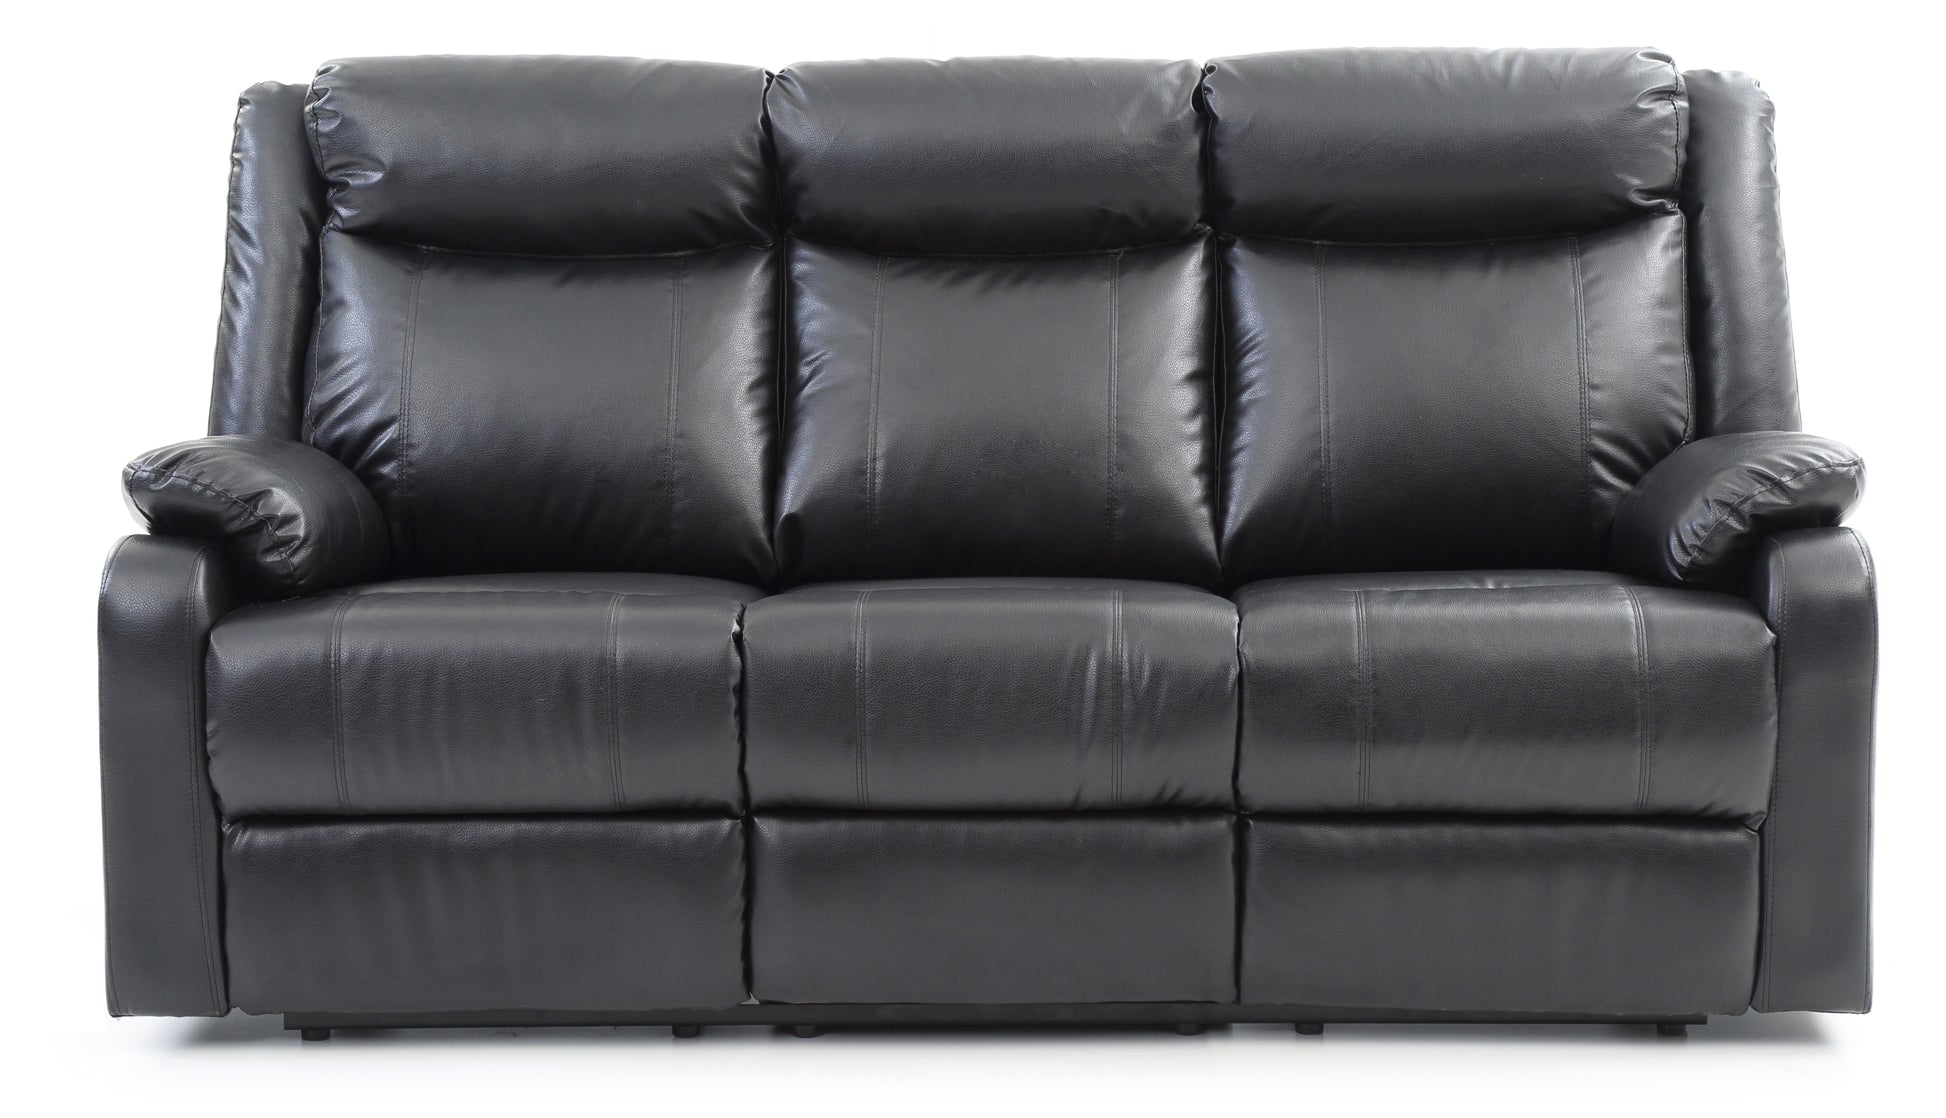 Glory Furniture Ward G761A-RS Double Reclining Sofa , BLACK - Enova Luxe Home Store